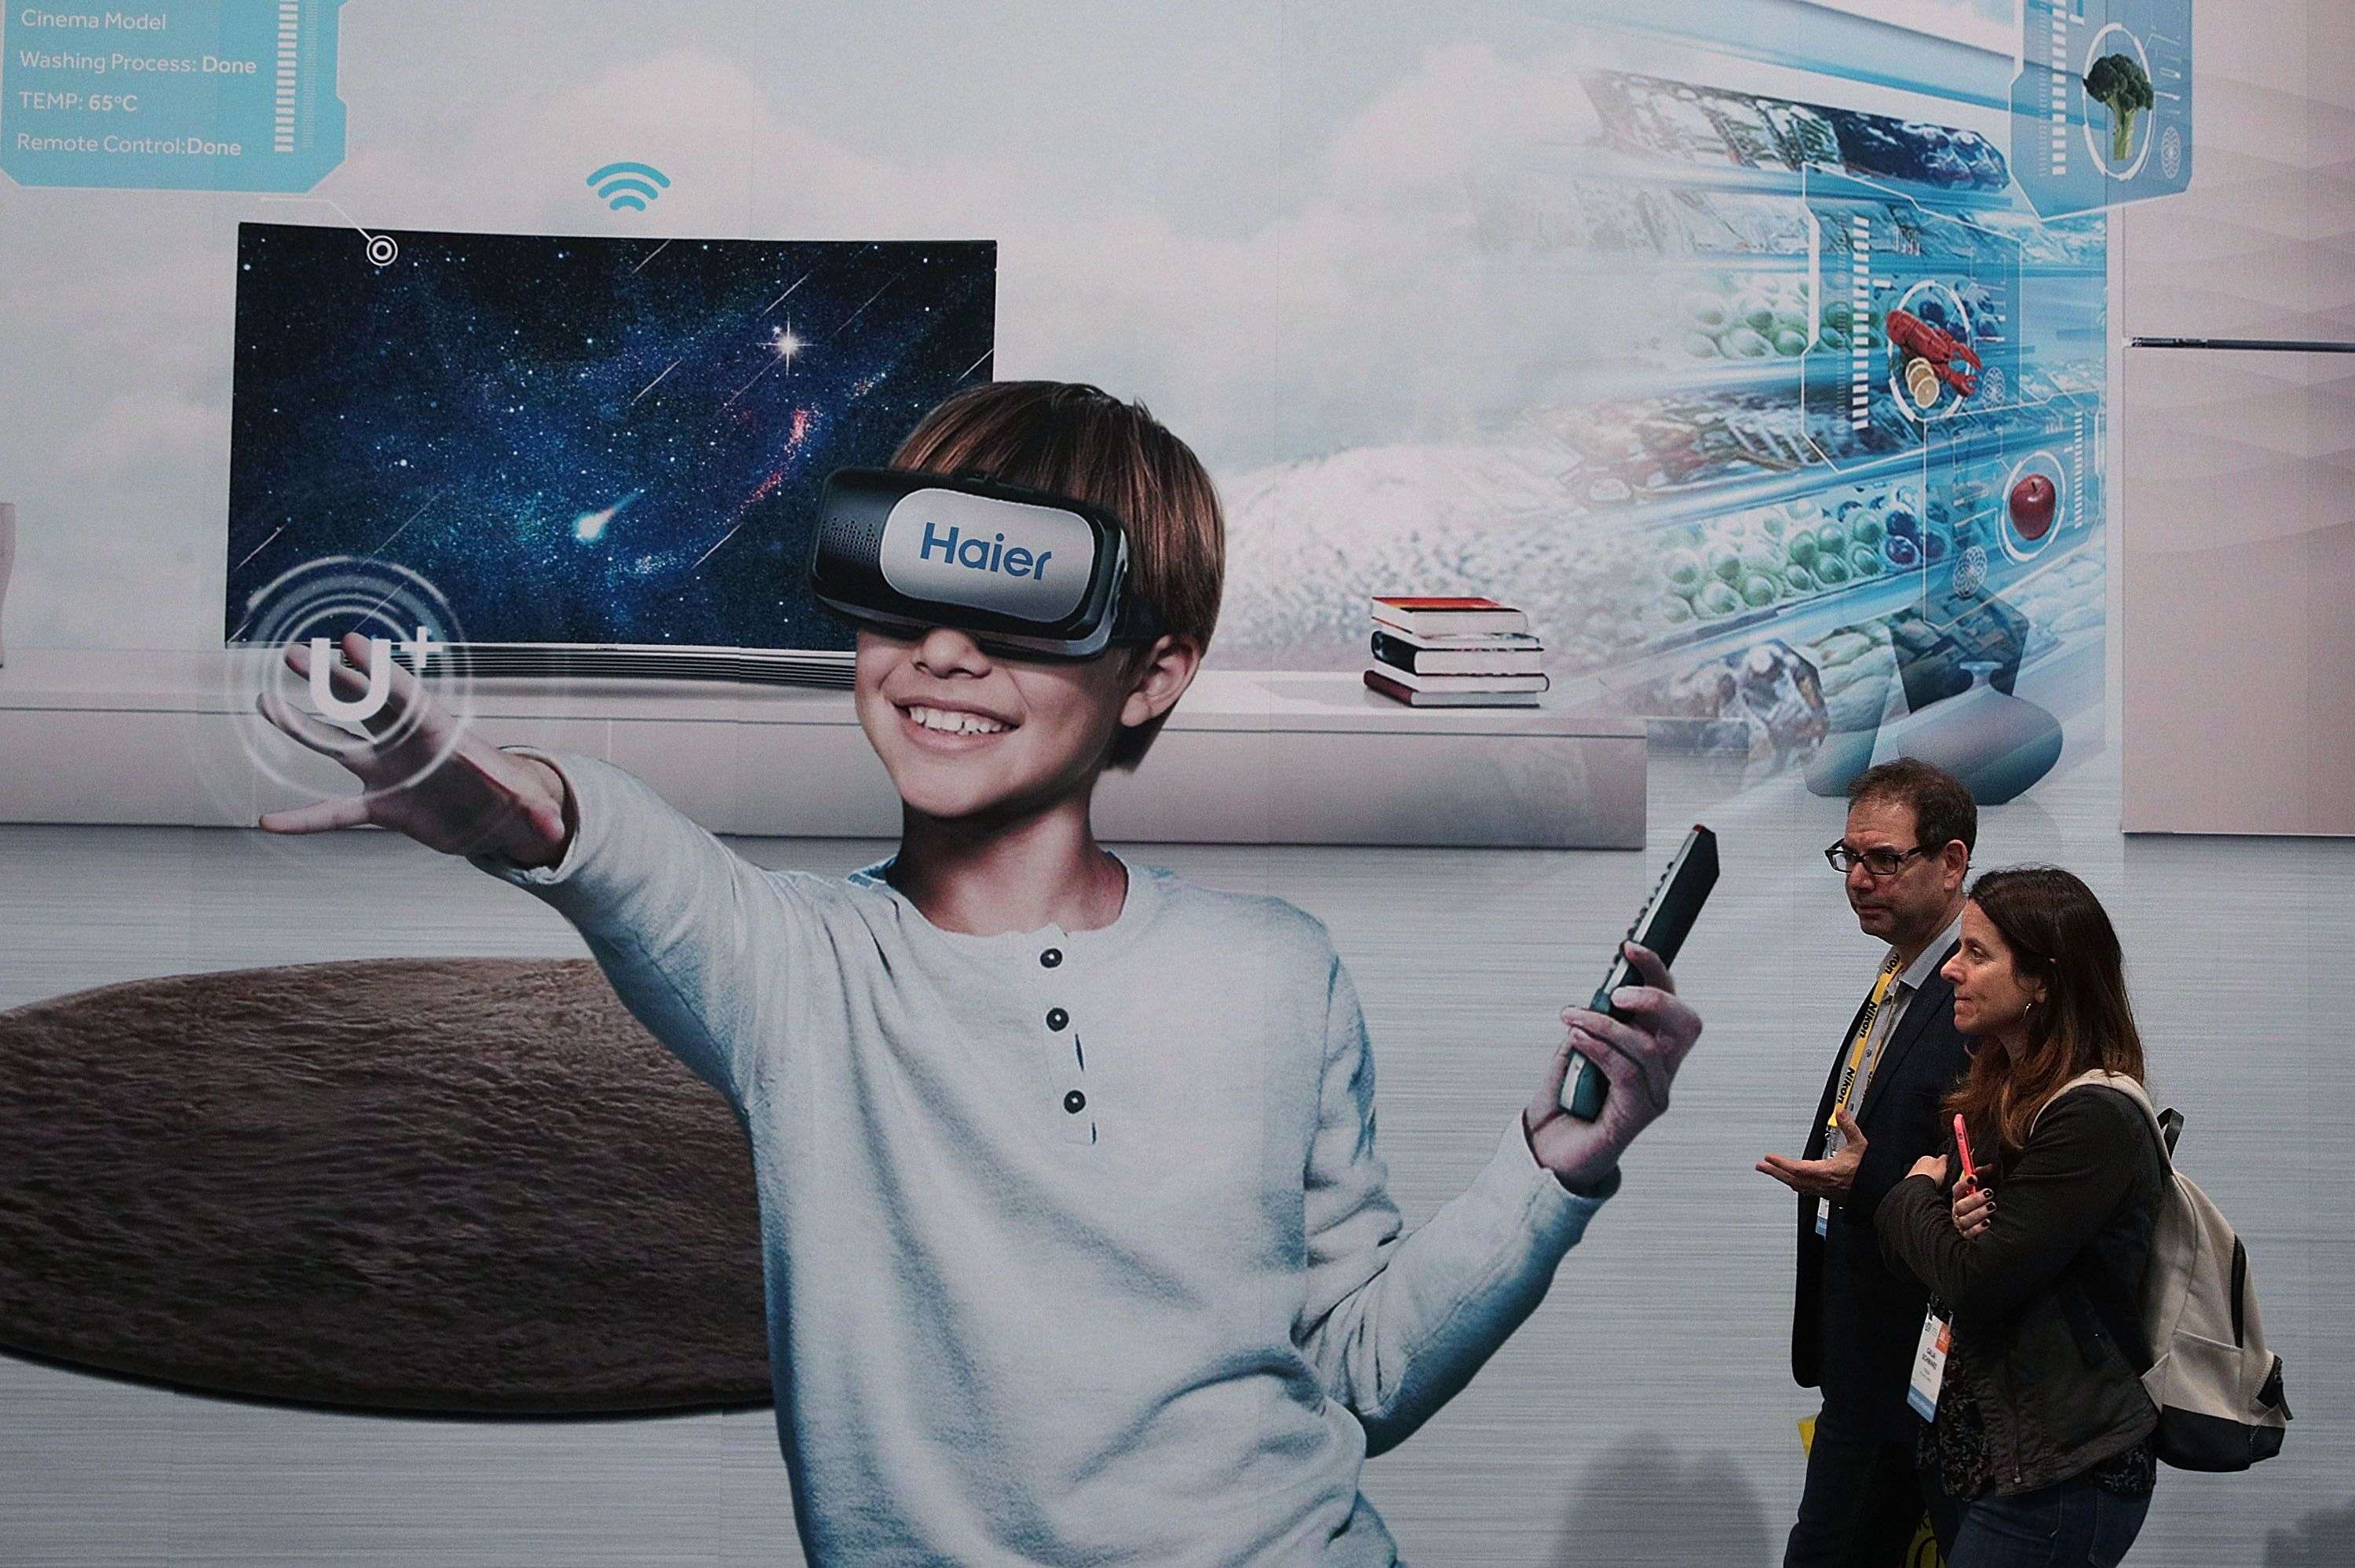 The survey found that 64 per cent are loyal to brands that engage them in multisensory experiences, using new technologies such as virtual reality or augmented reality. Photo: AFP